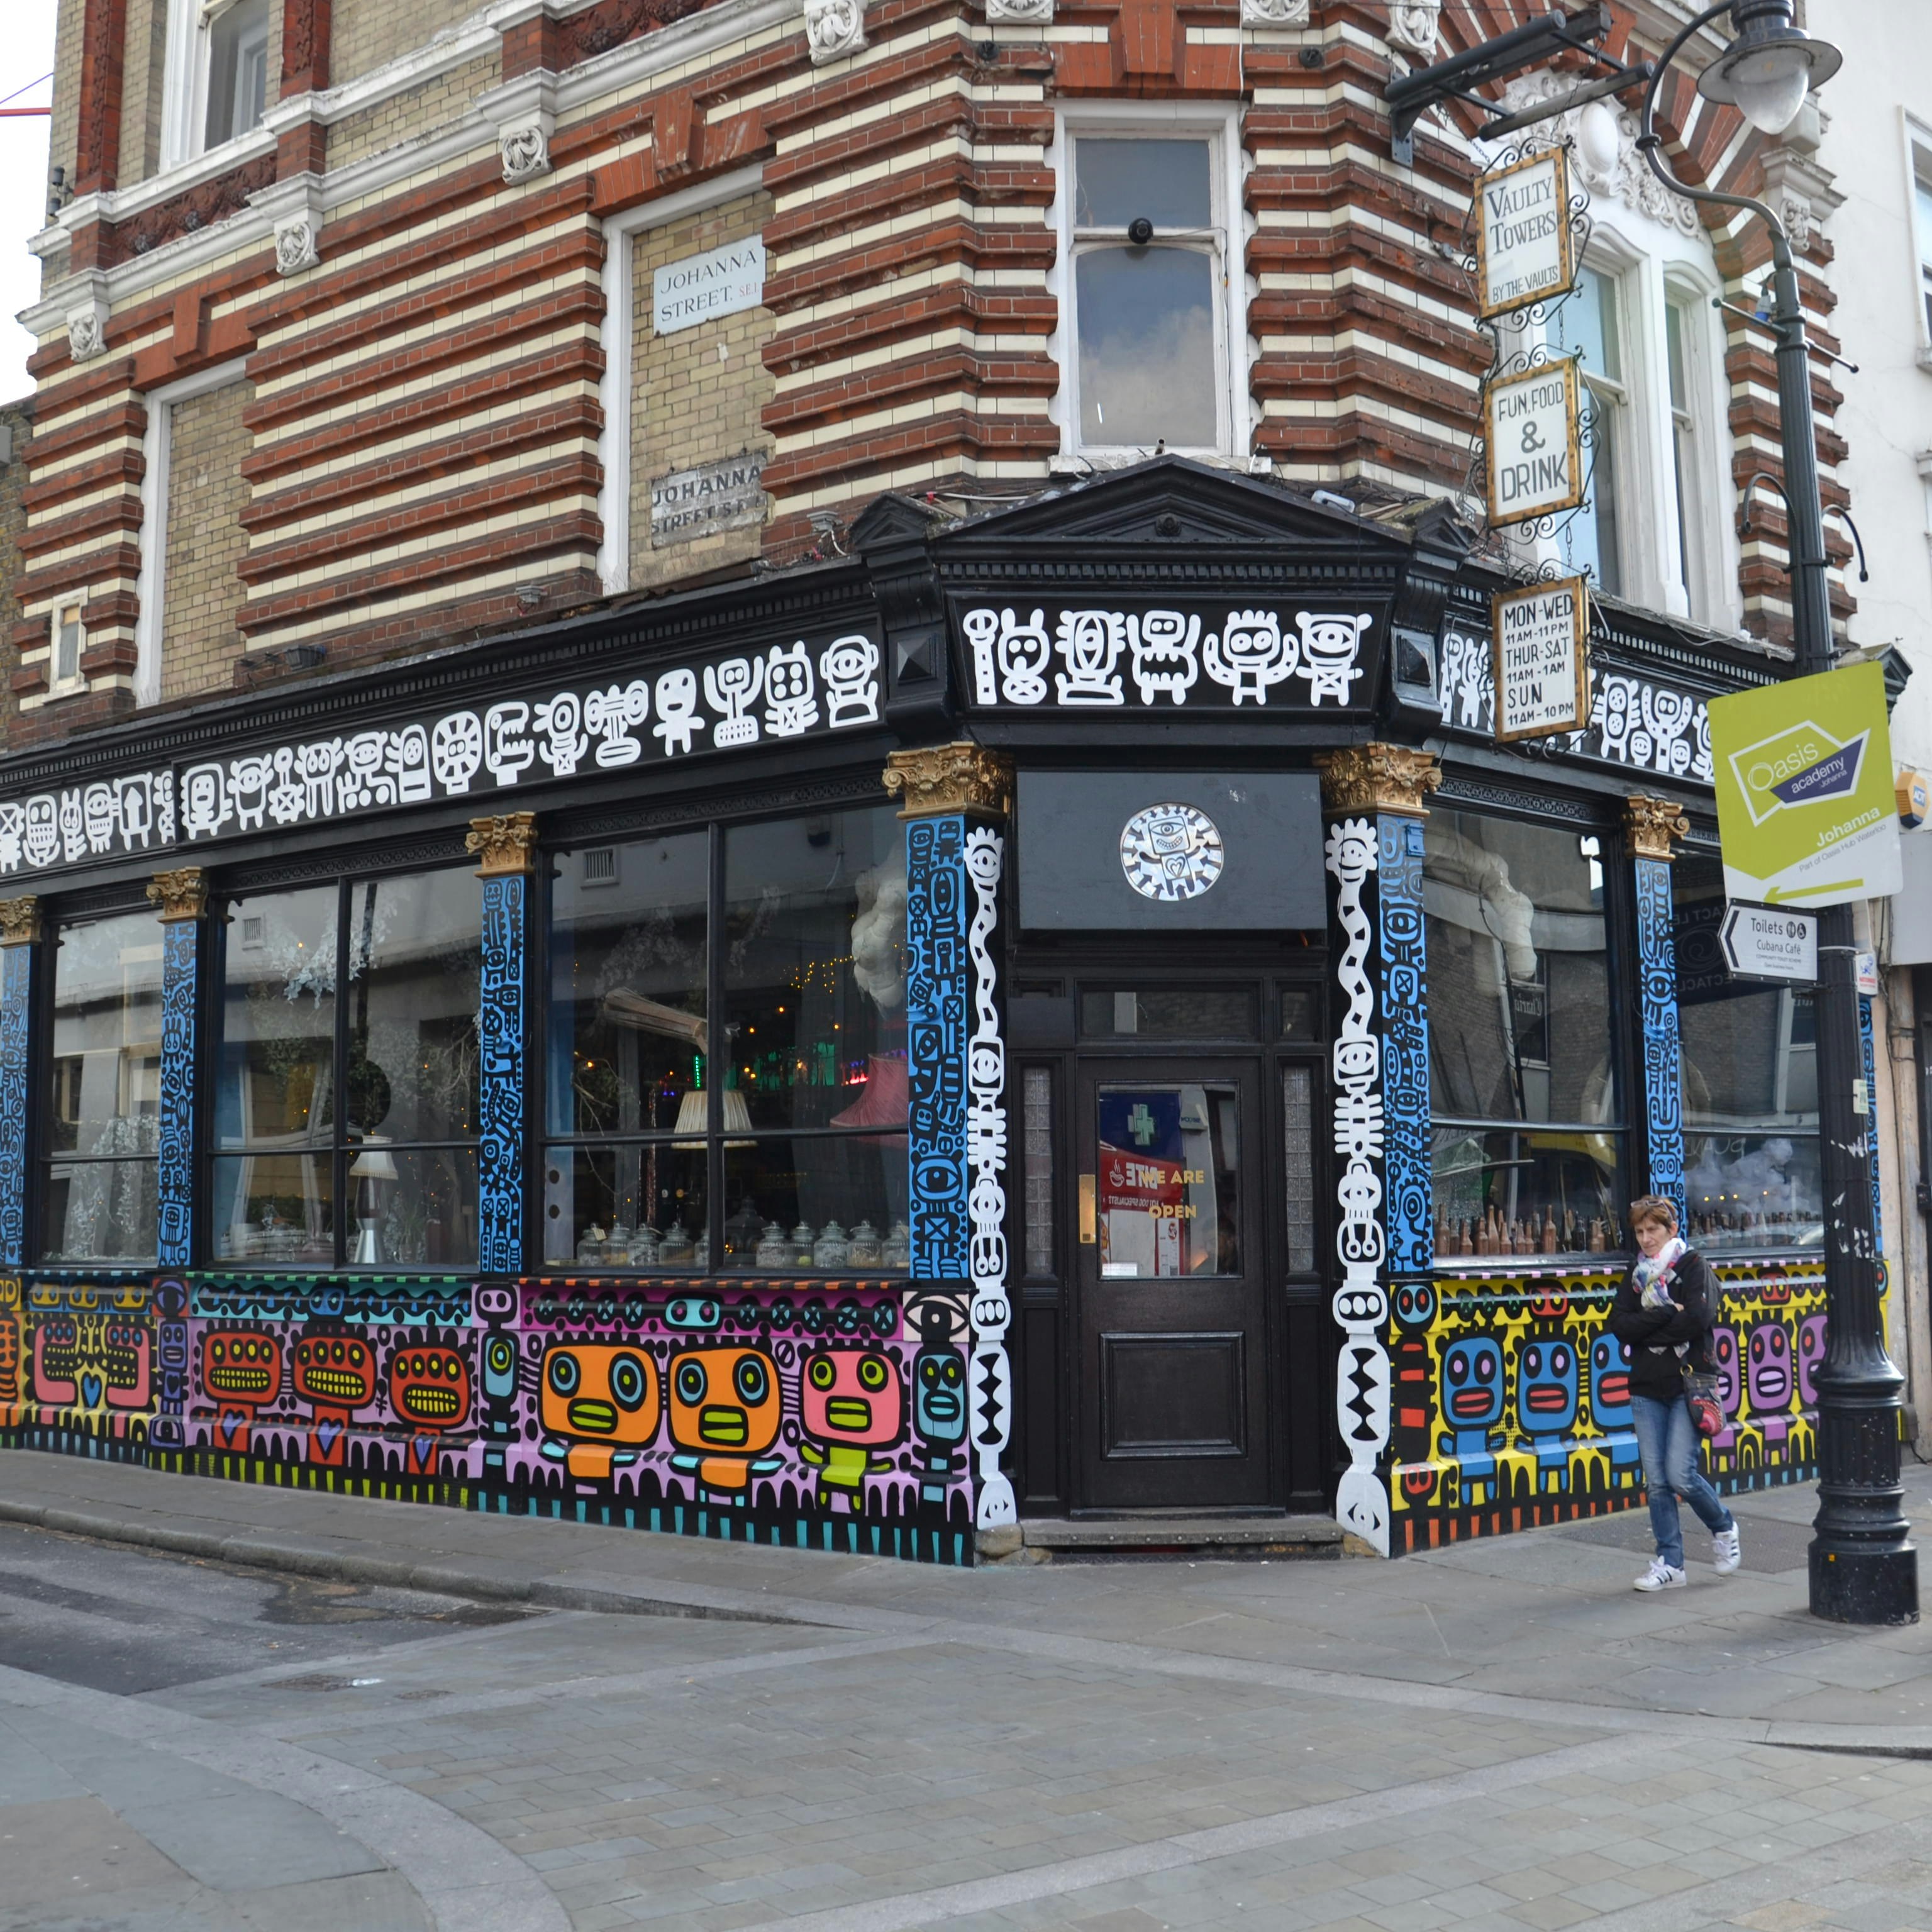 Outside Vaulty Towers, a quirky bar and events space in Waterloo